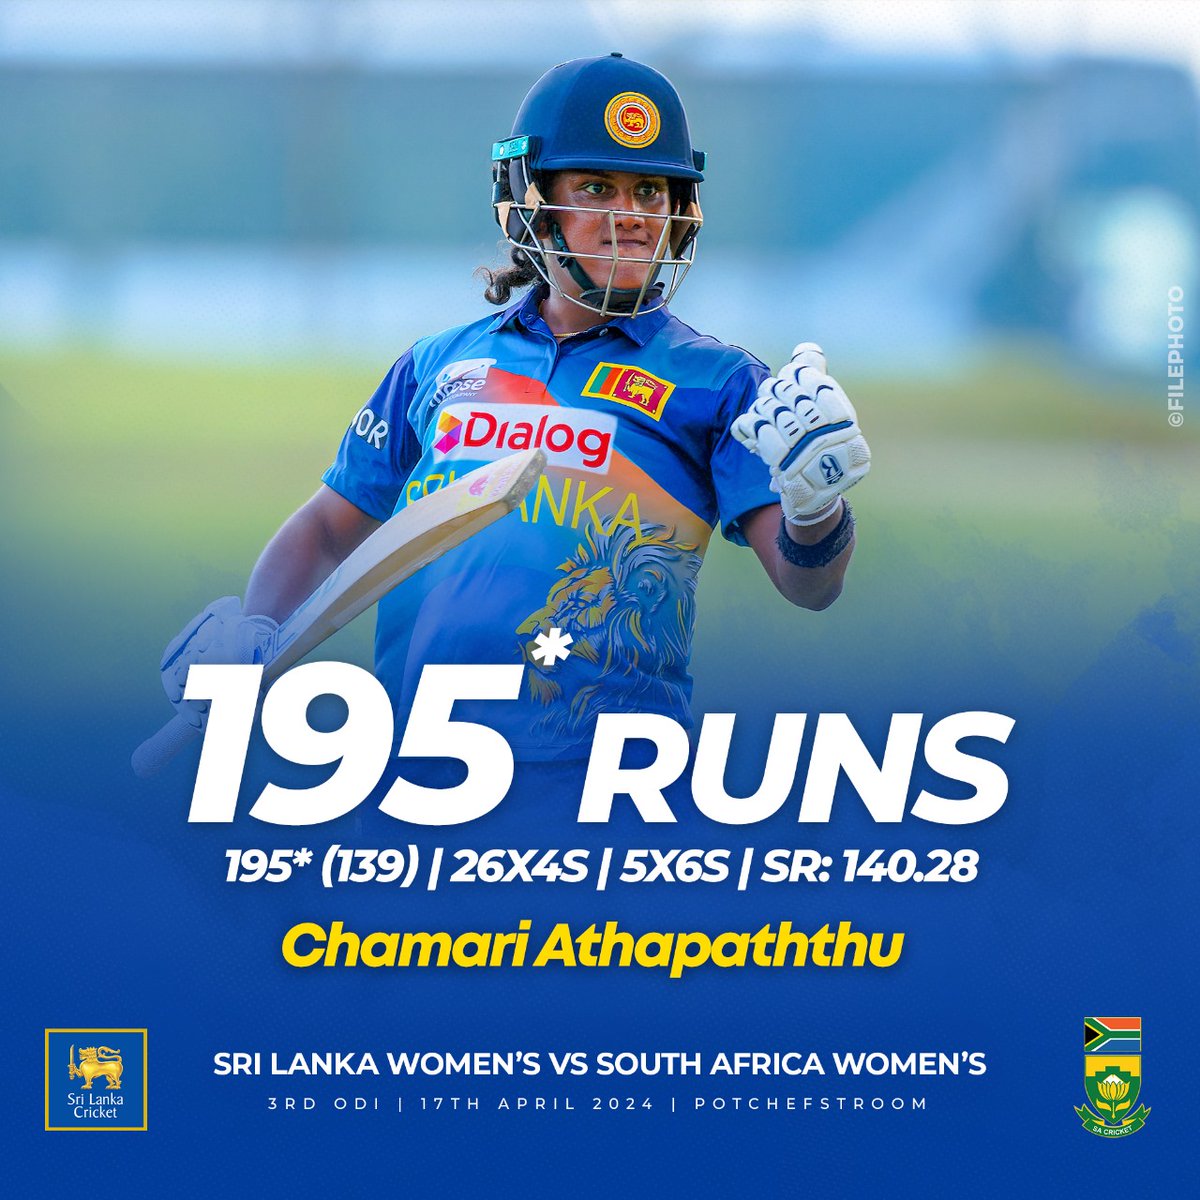 Chamari Athapaththu rewrites the history books! 🇱🇰🎉 #ChamariTheHurricane Our star batter smashed a phenomenal 195* - the highest score EVER by a Sri Lankan woman in ODIs and the THIRD HIGHEST in the WORLD for women's ODIs! #WomensCricket #SAvSL #LionessesRoar